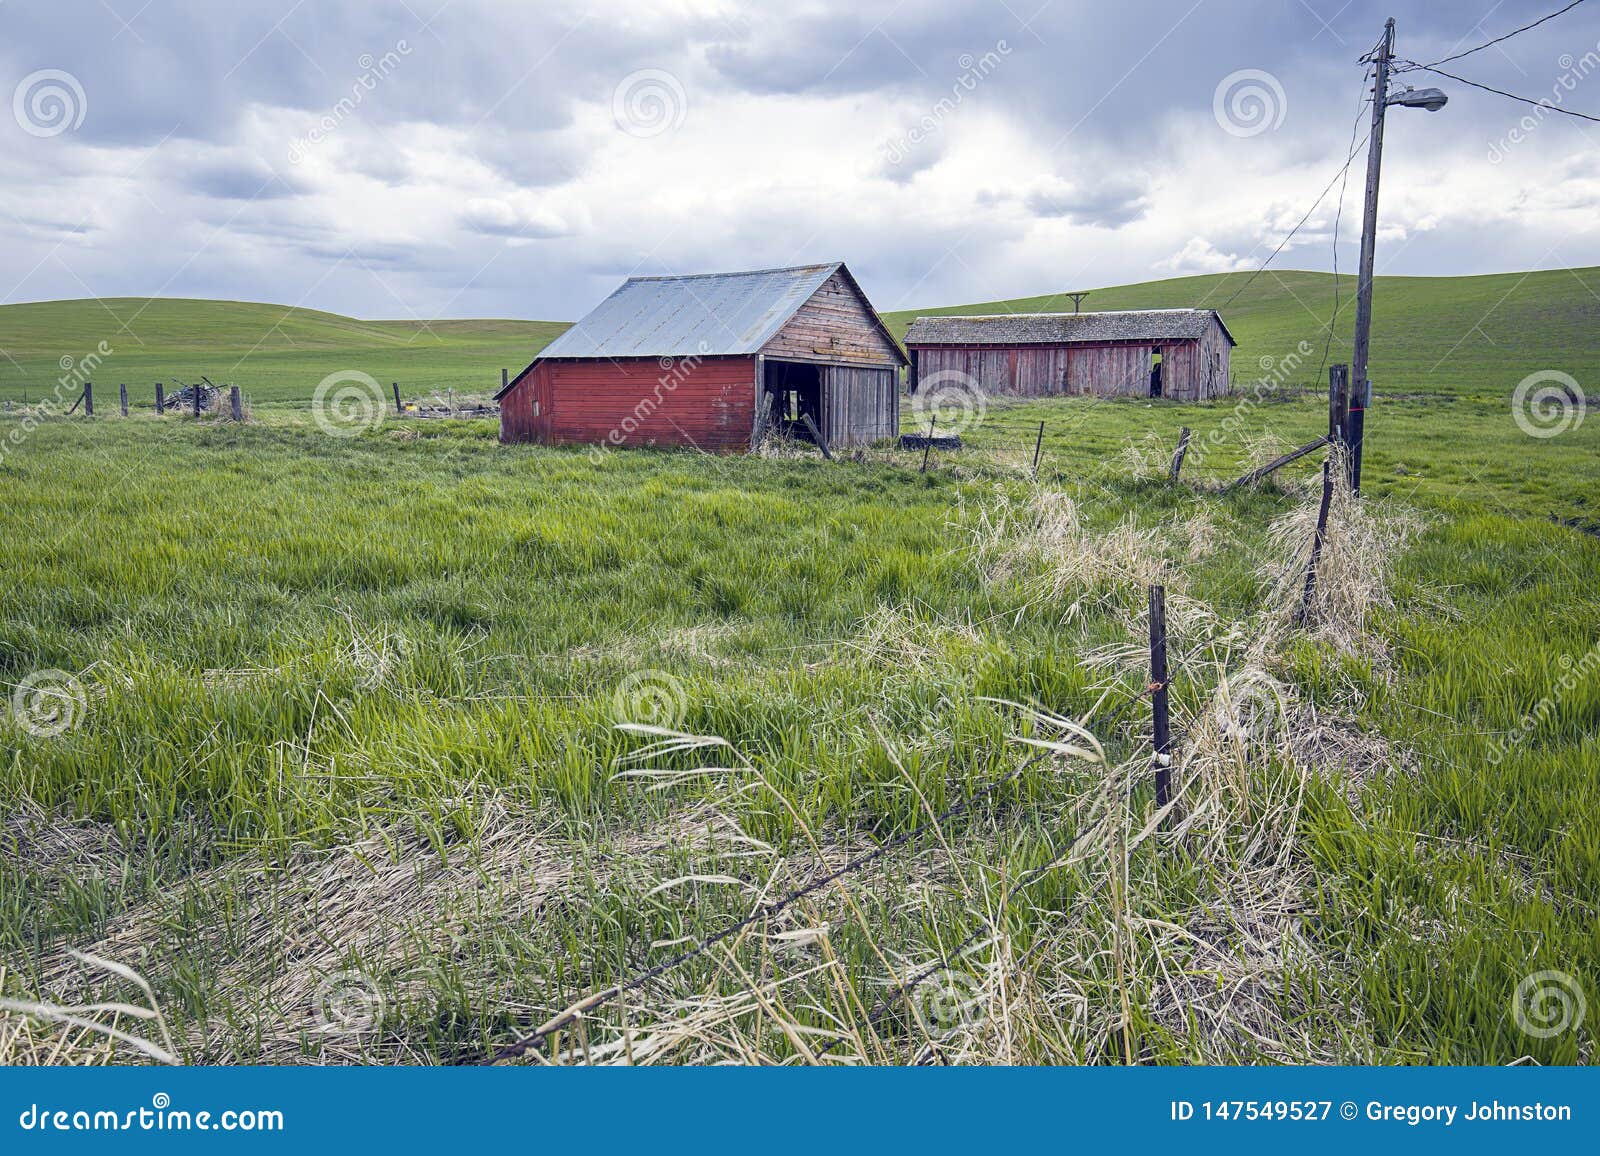 36 Top Images The Red Barn Blandon Pa : The Red Barn~ Greene County, Pa. byTammieDunlap | Big red ...